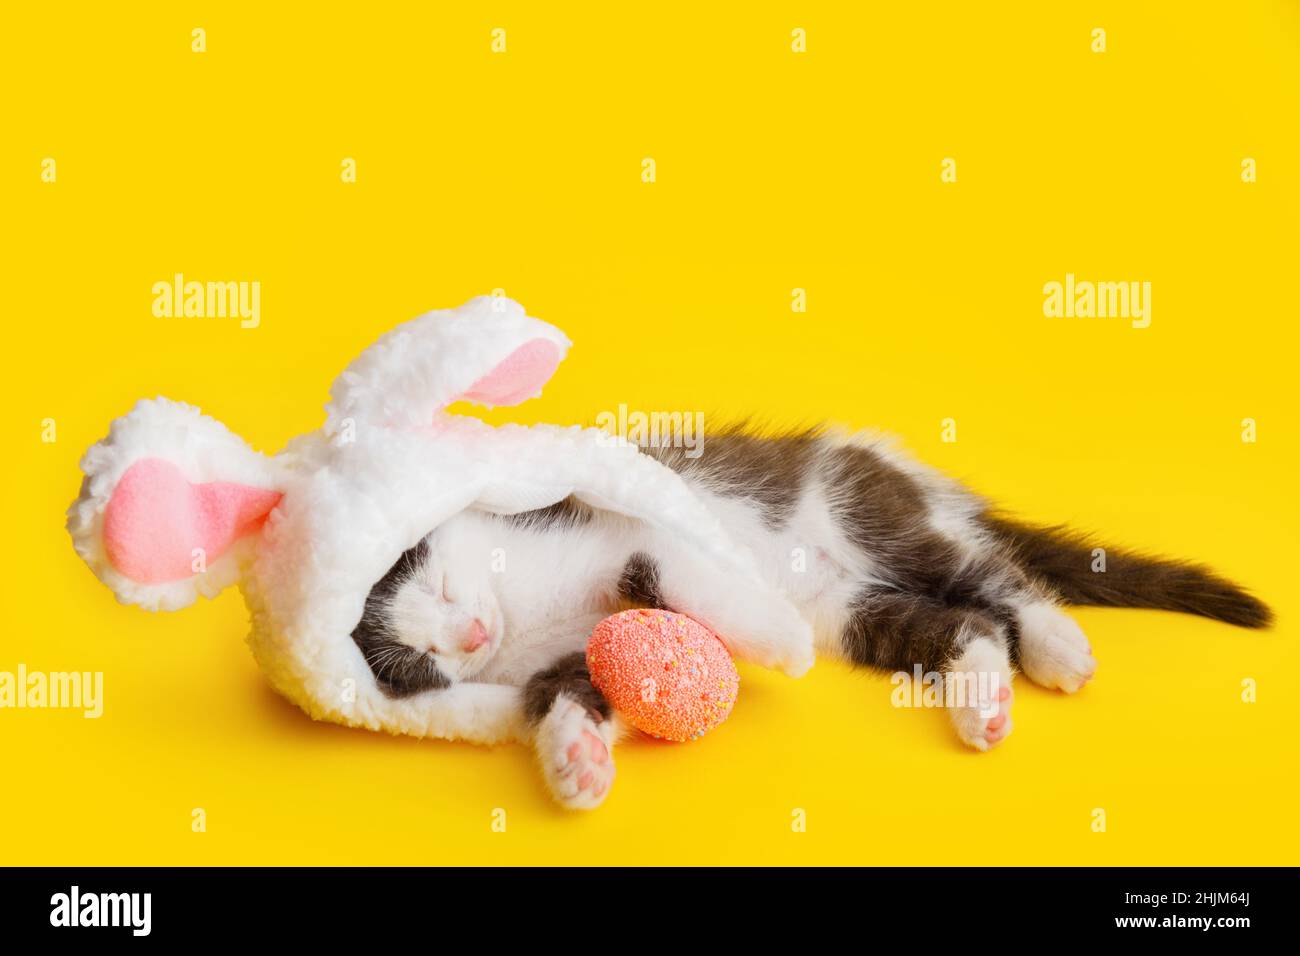 Little cute kitten sleeping Pretending to be Easter bunny. Cat pet wearing rabbit hat with pink bunny ears Hugs Easter pink egg while sleeping Stock Photo